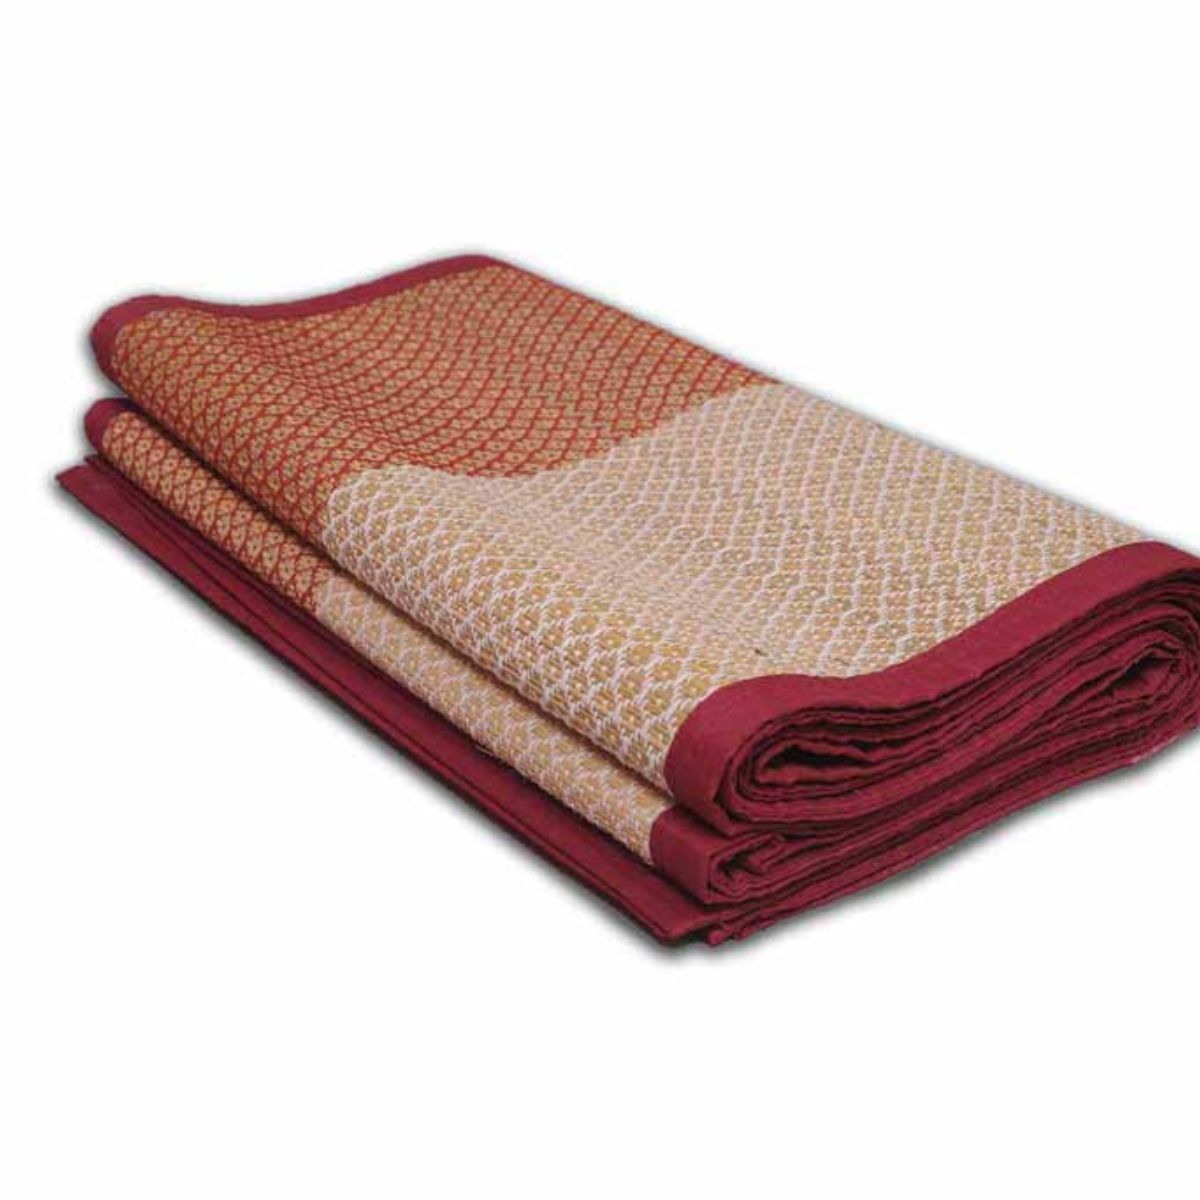 Chatai mat for sitting on floor